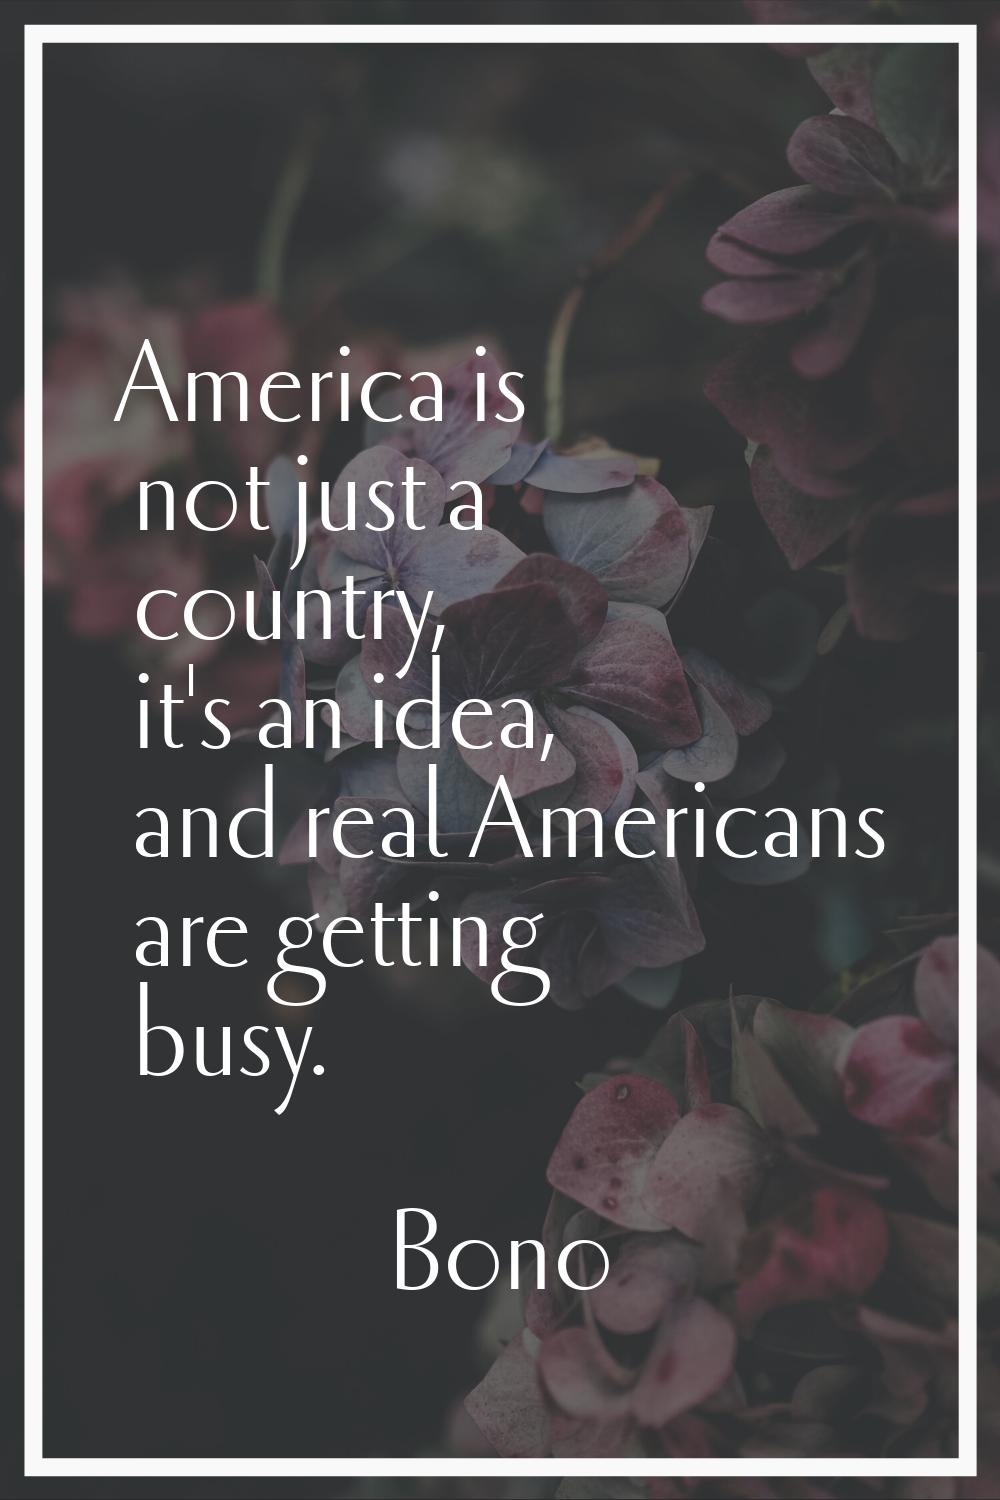 America is not just a country, it's an idea, and real Americans are getting busy.